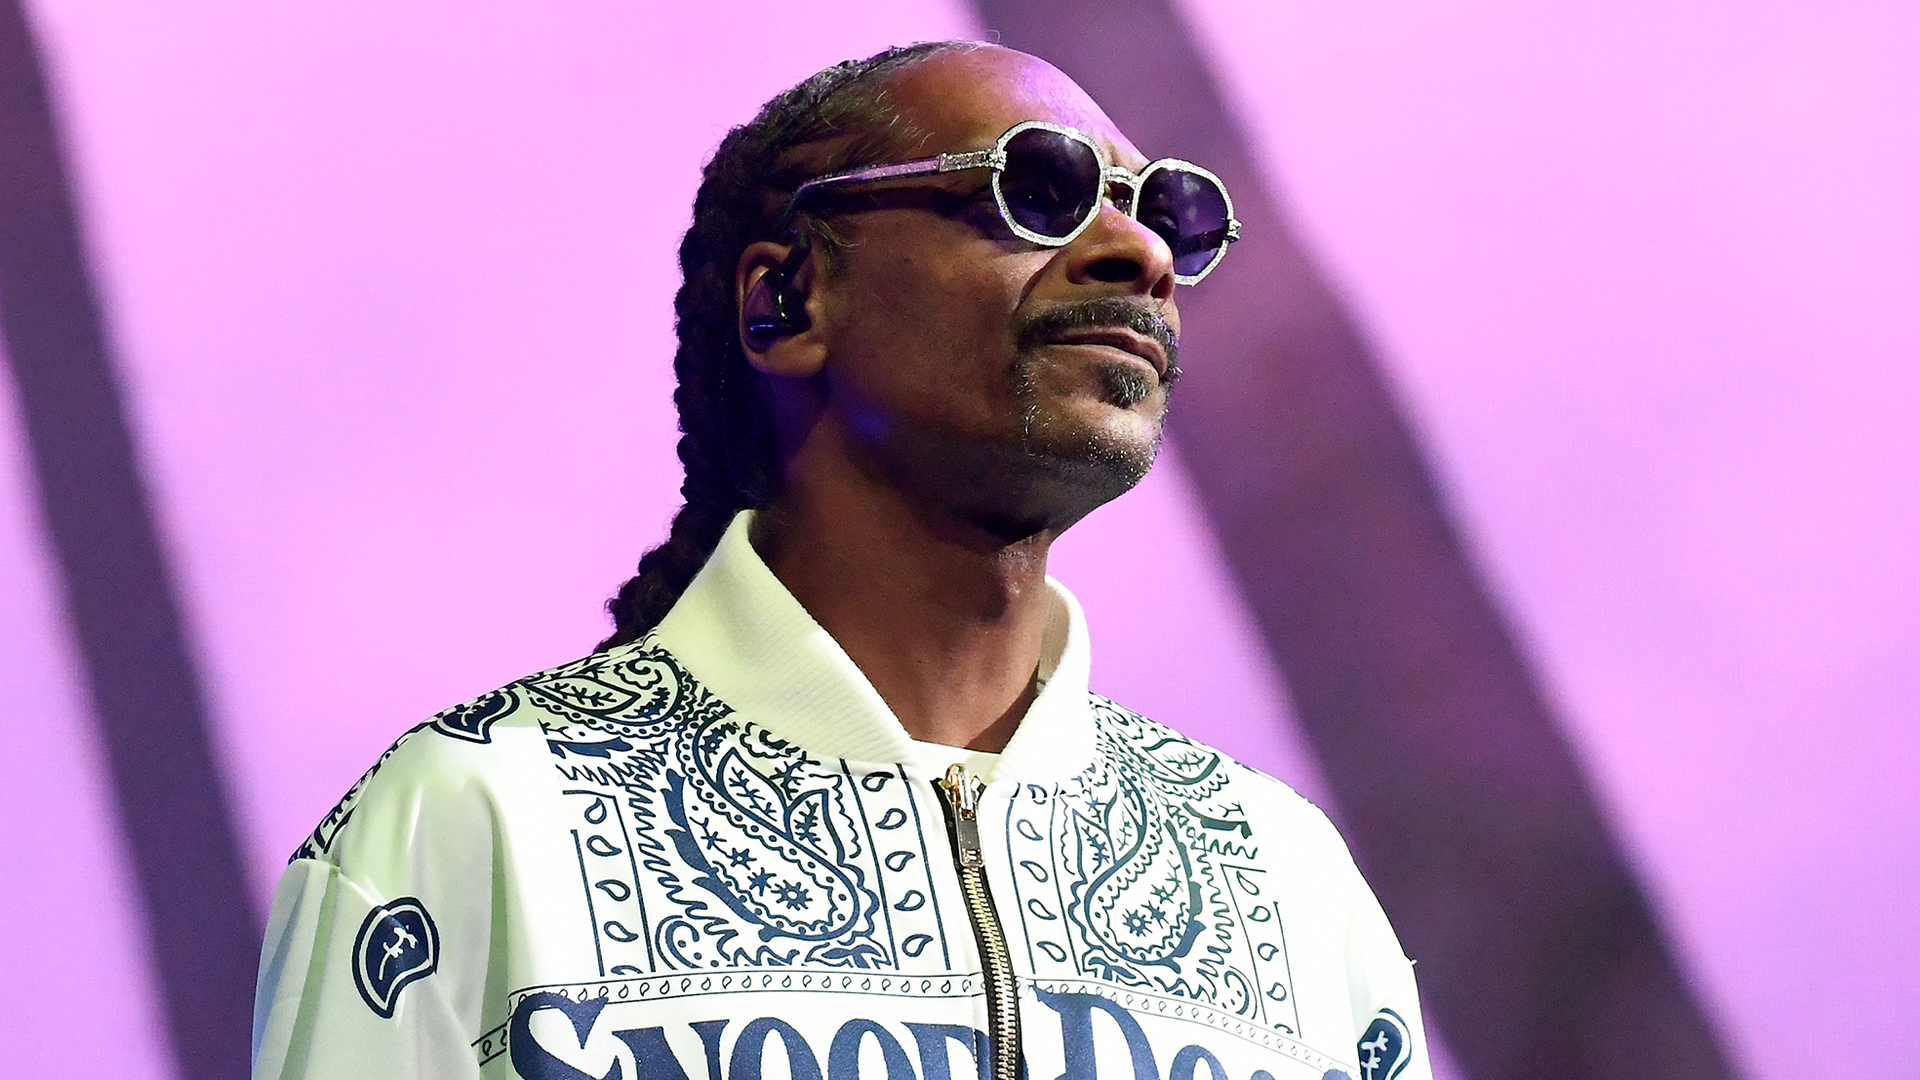 Snoop Dogg Claims He Received A Payout Of Less Than $45,000 After Earning 1 Billion Streams On Spotify